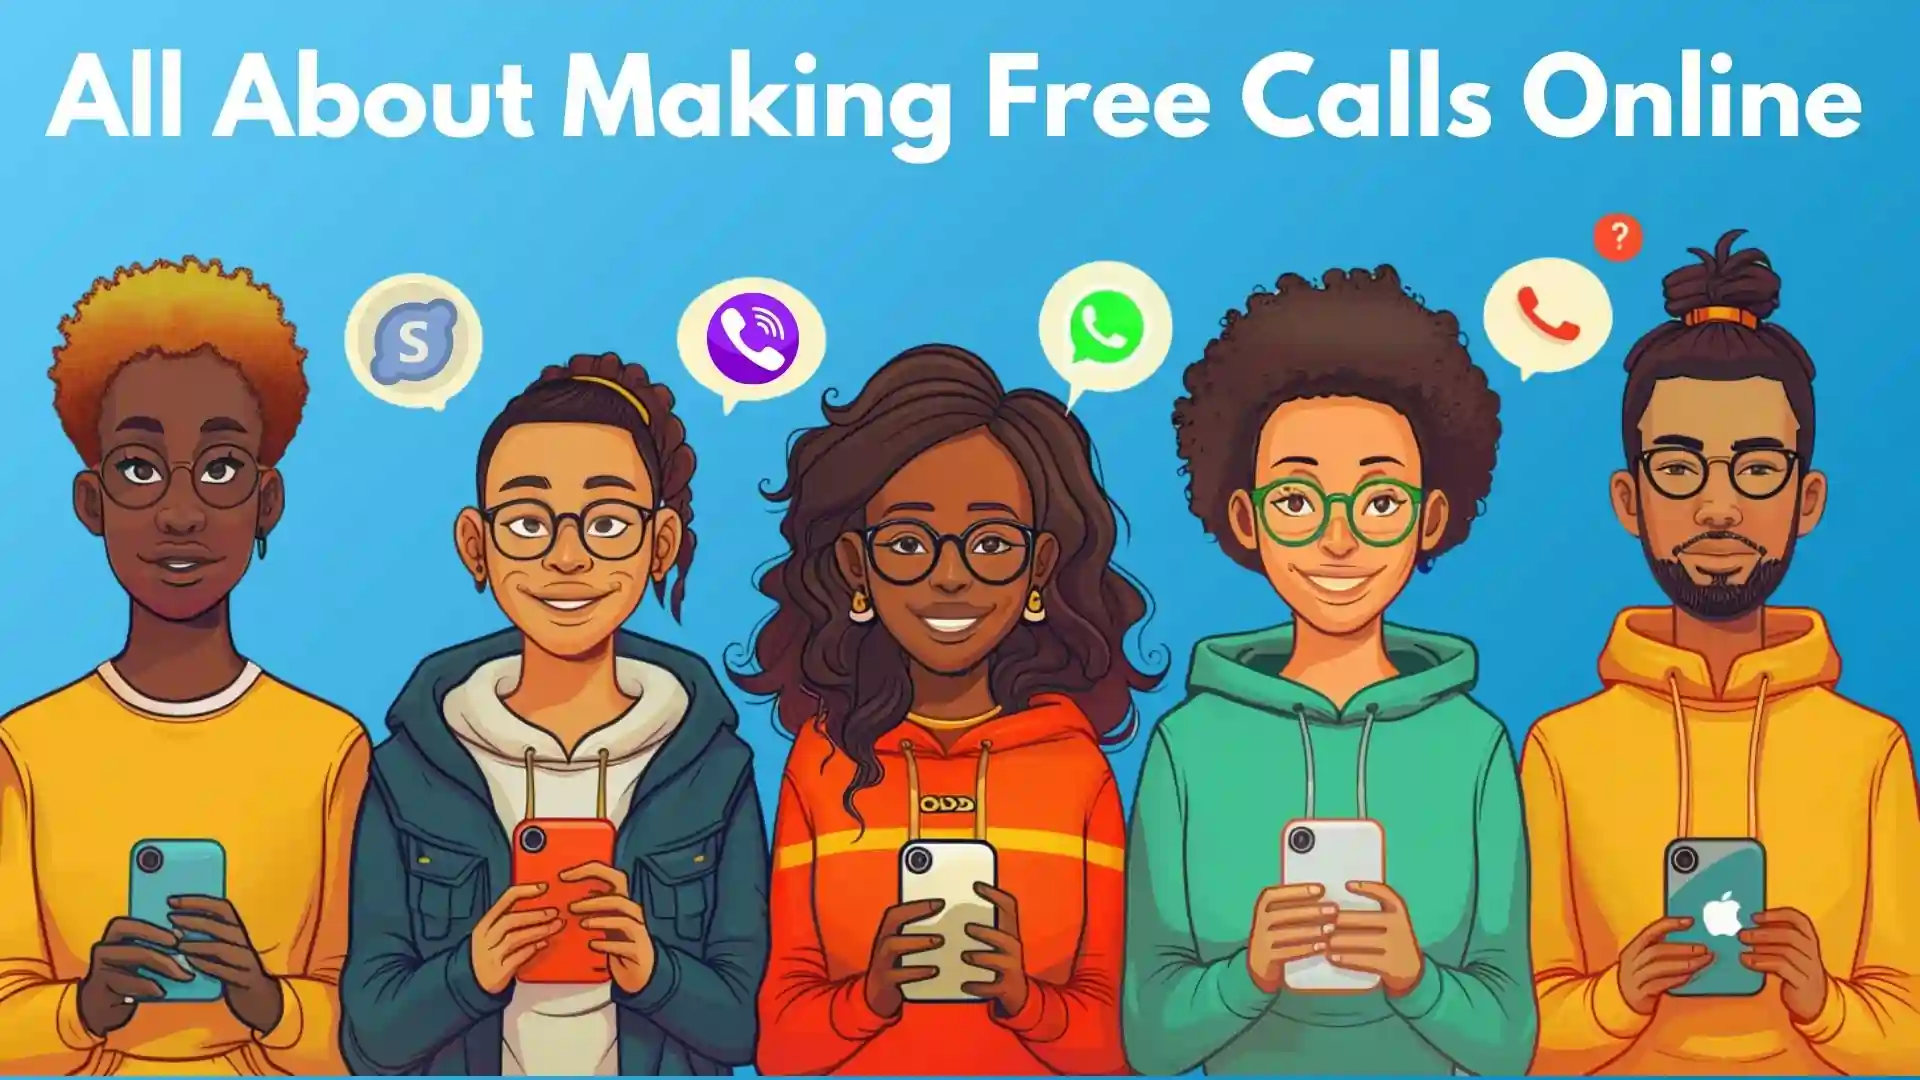 All about making free calls online